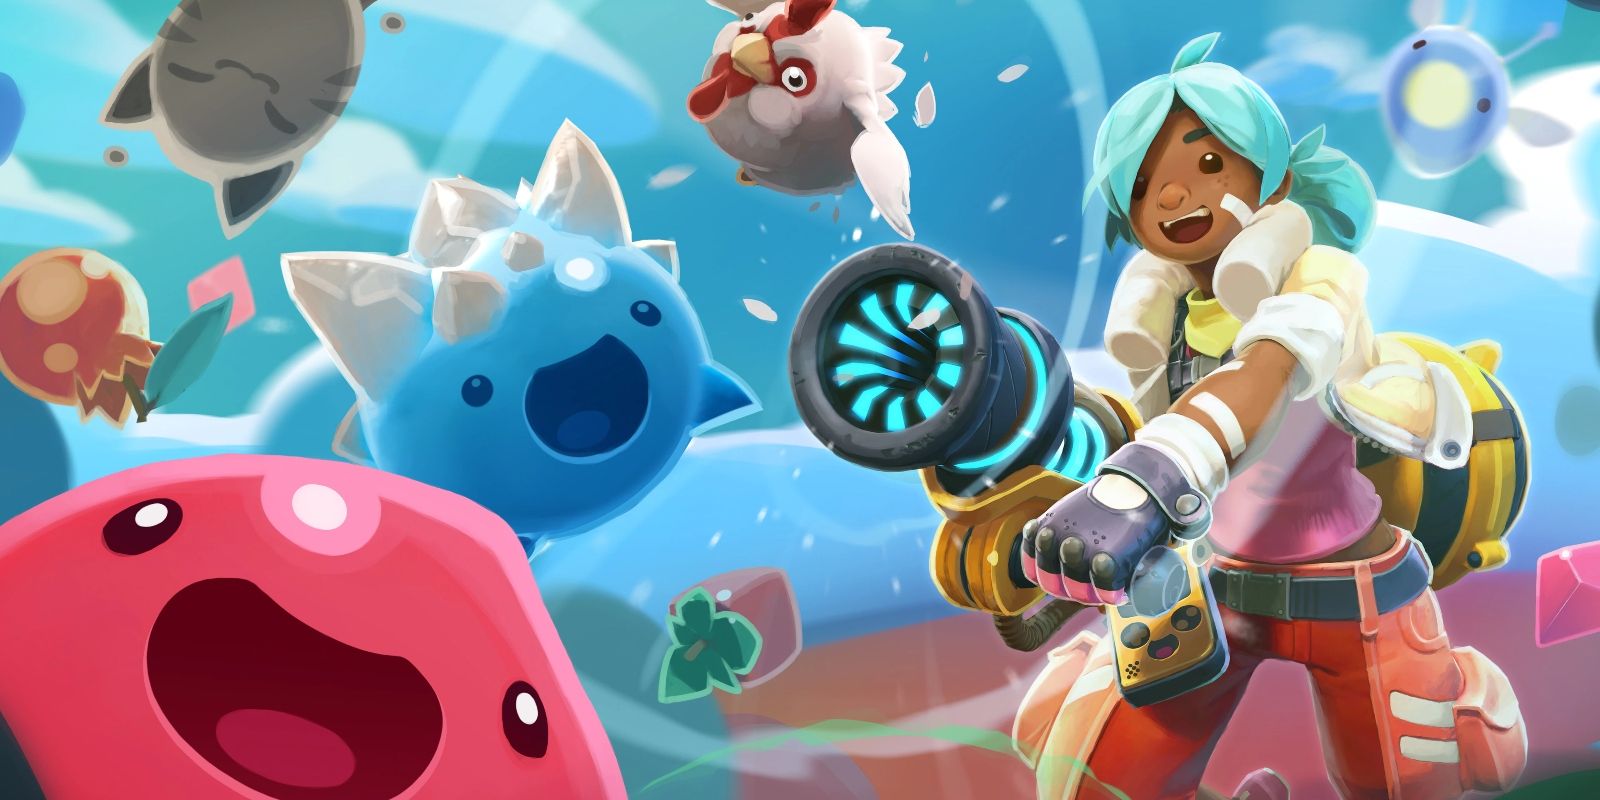 Slime Rancher 2 [Everything You Should Know]